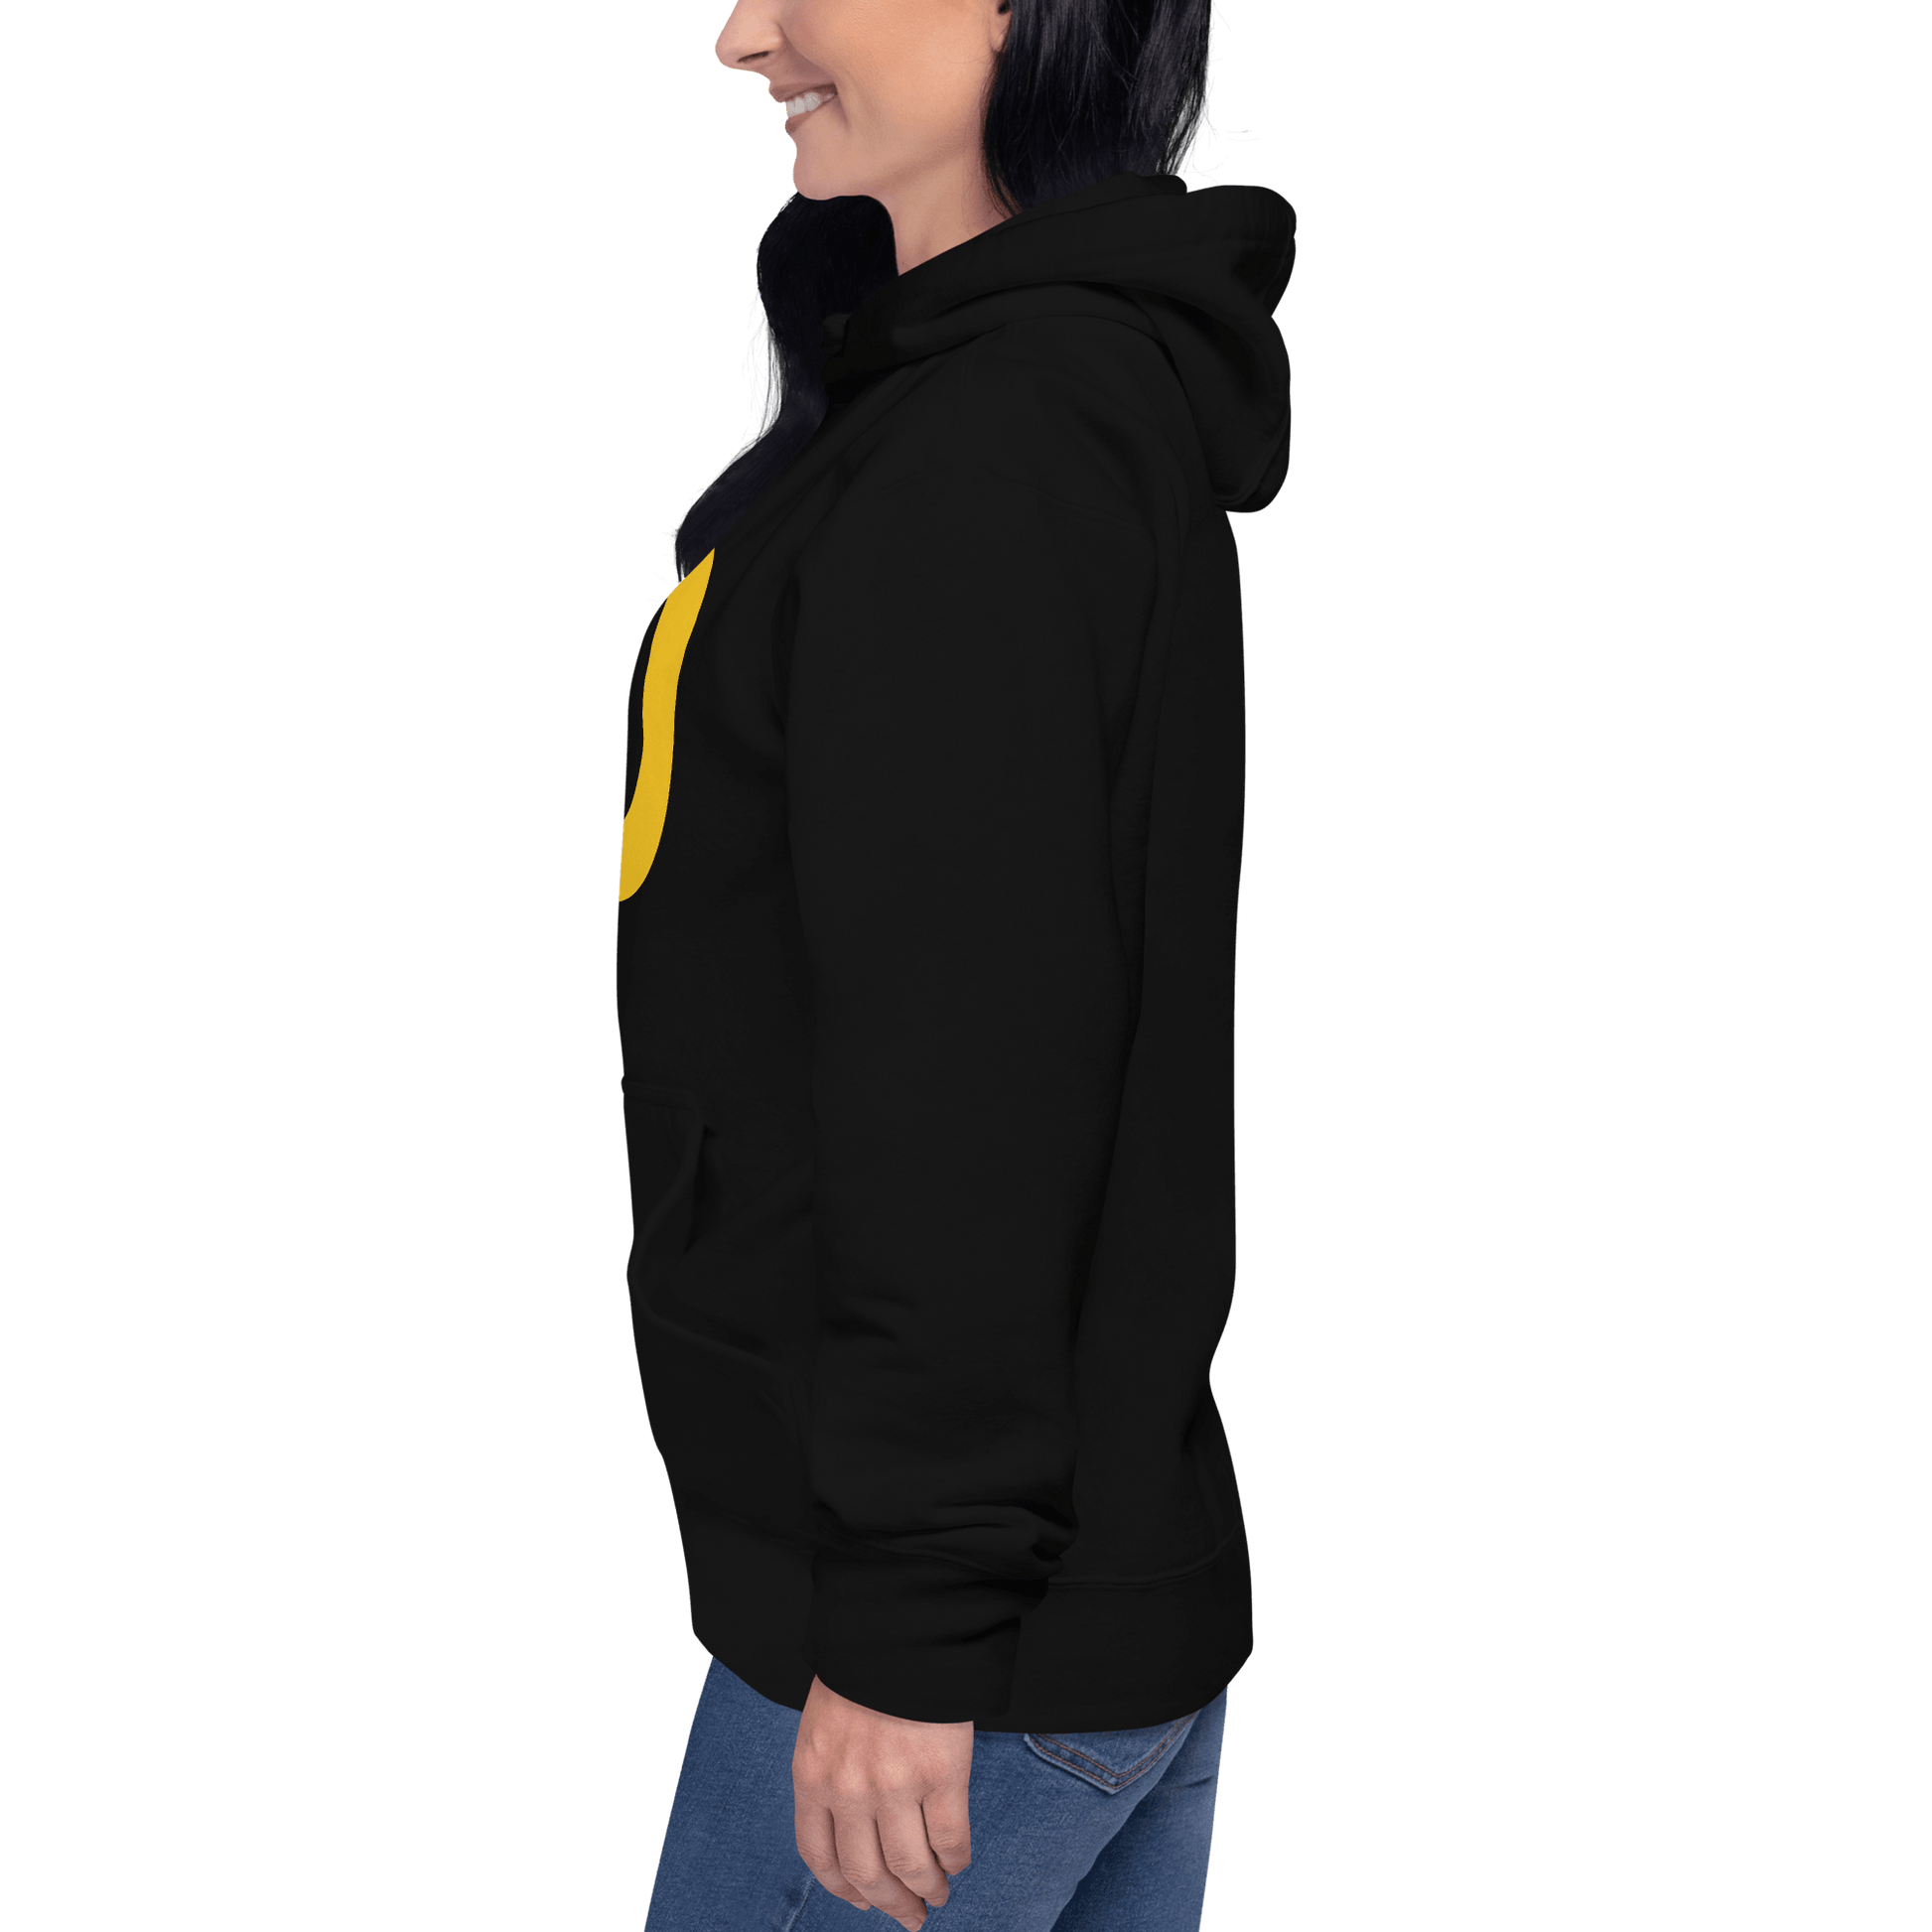 Detroit 'Old French D' Hoodie (Gold Full Body Outline) | Unisex Premium - Circumspice Michigan